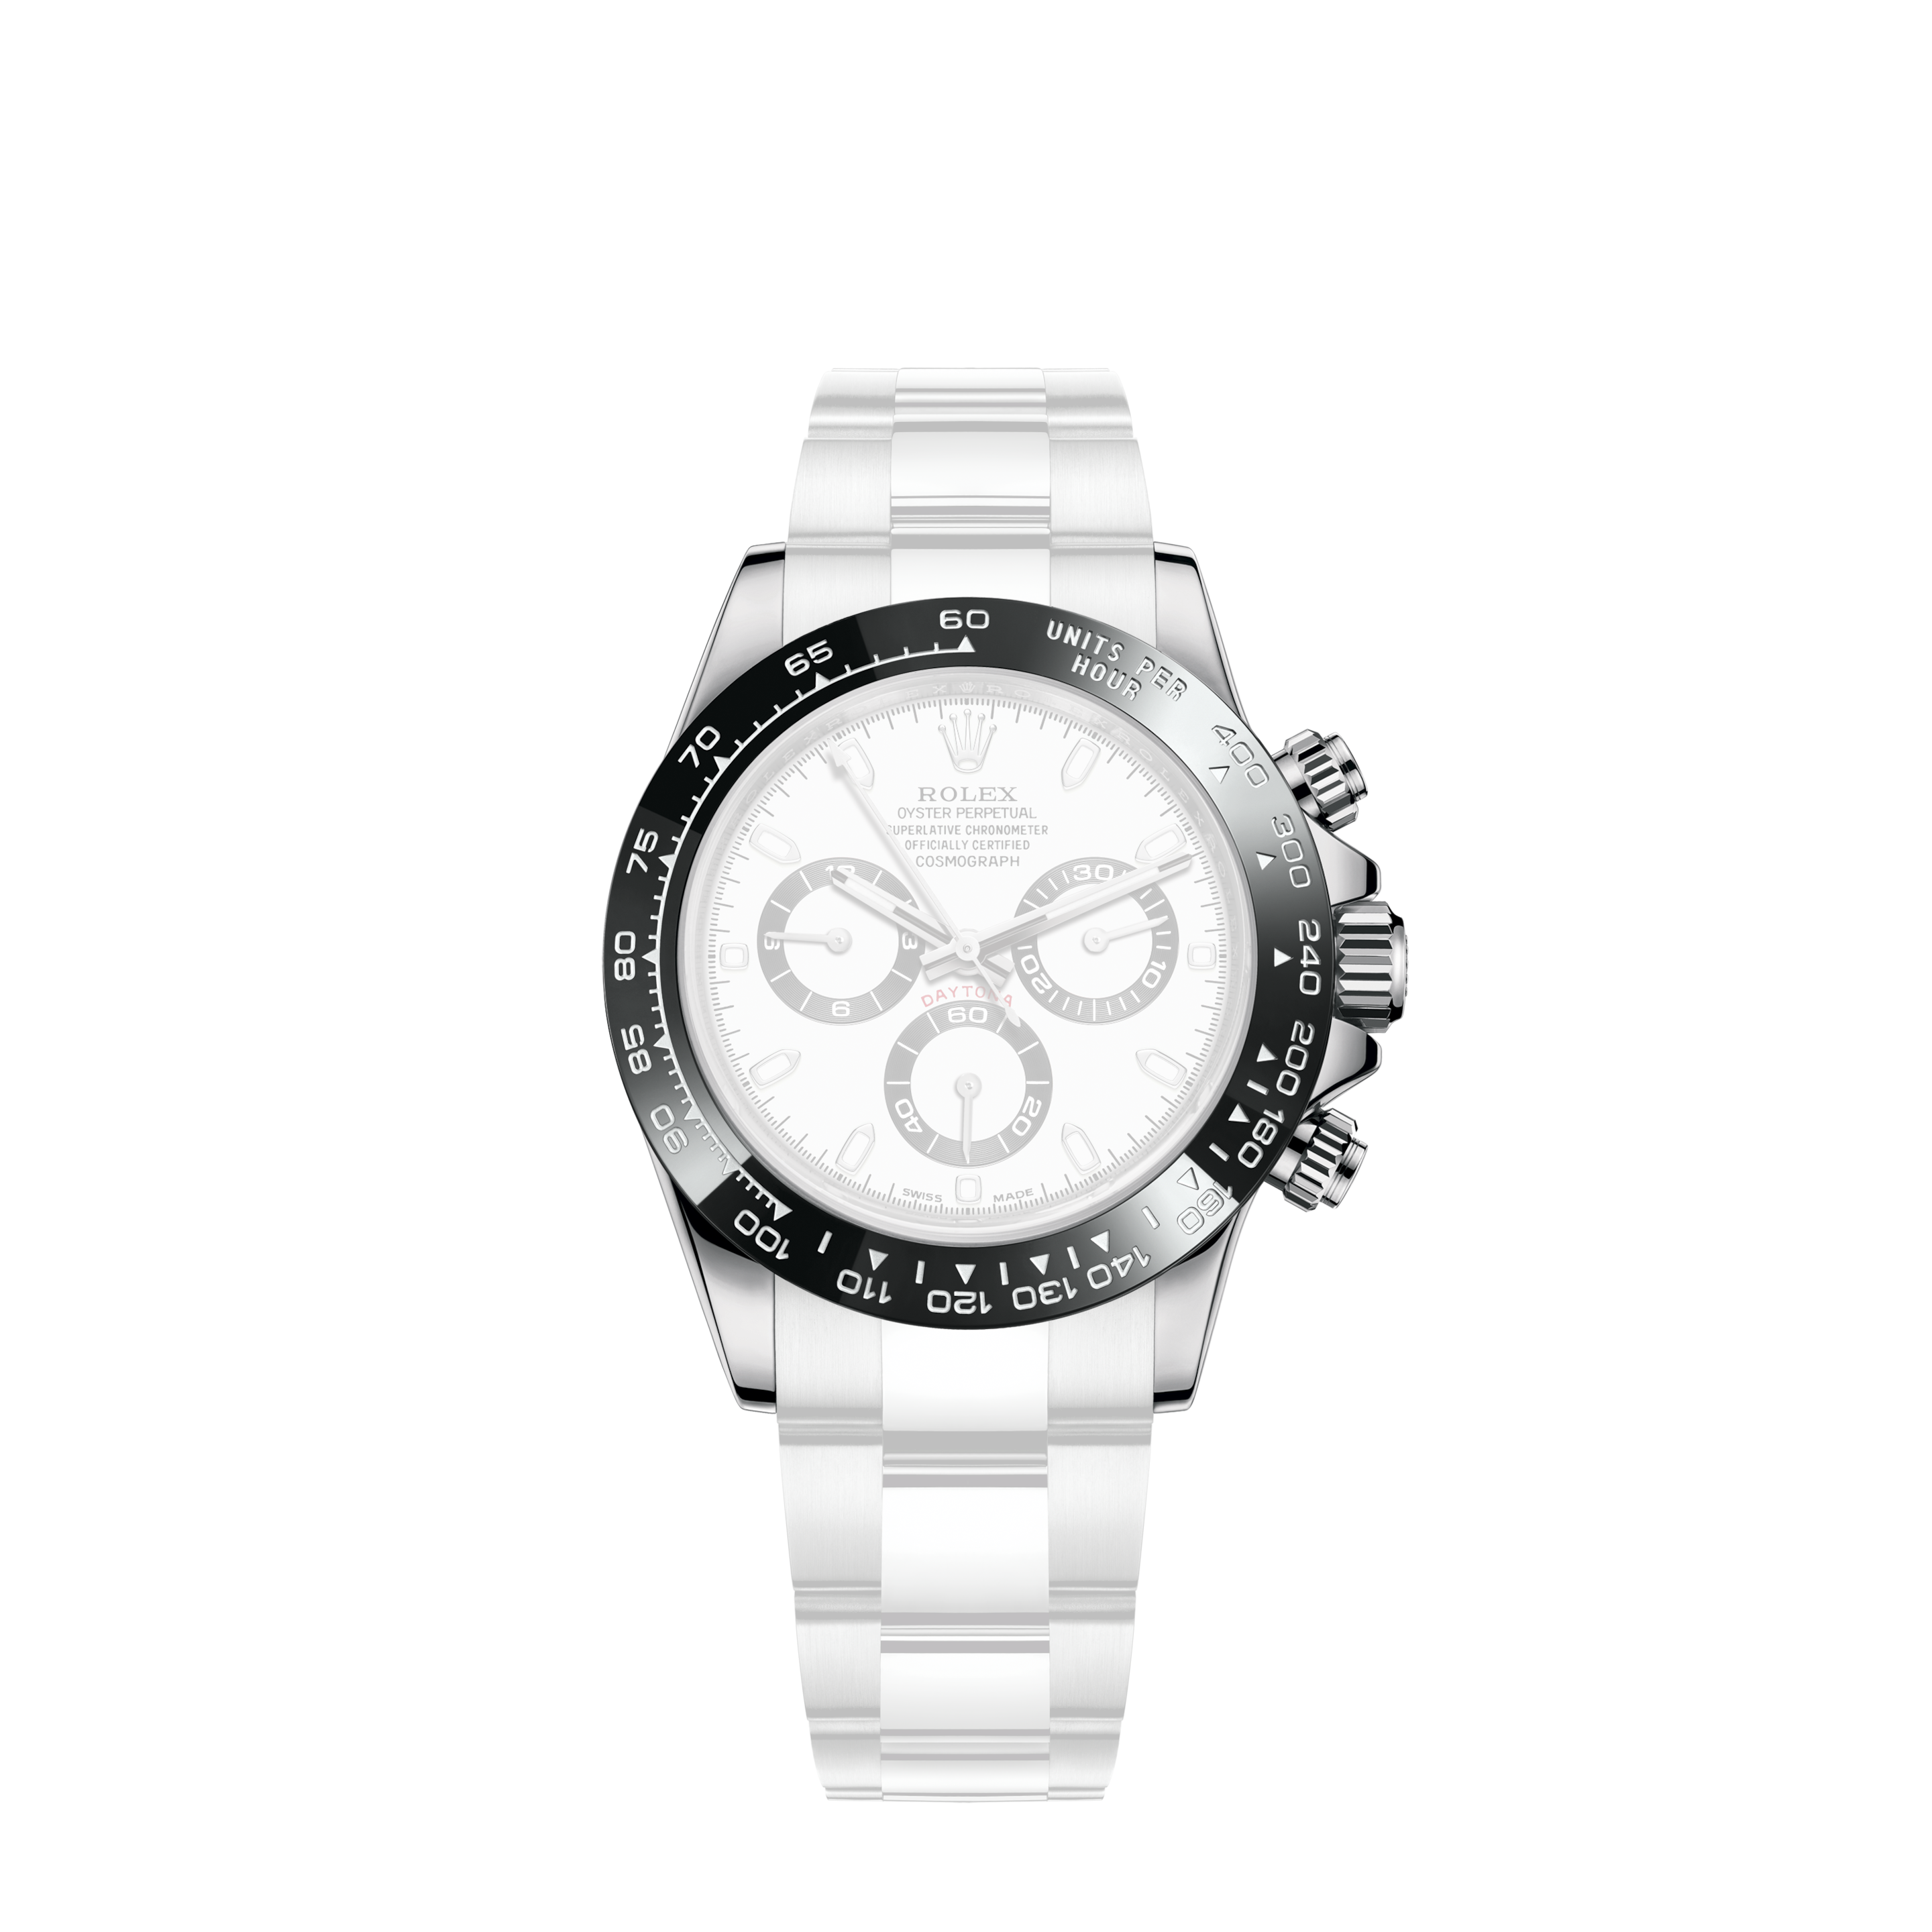 Rolex Turn-O-Graph 6202 amazing dialRolex Turn-O-Graph Datejust Men's Stainless Steel Watch 116264